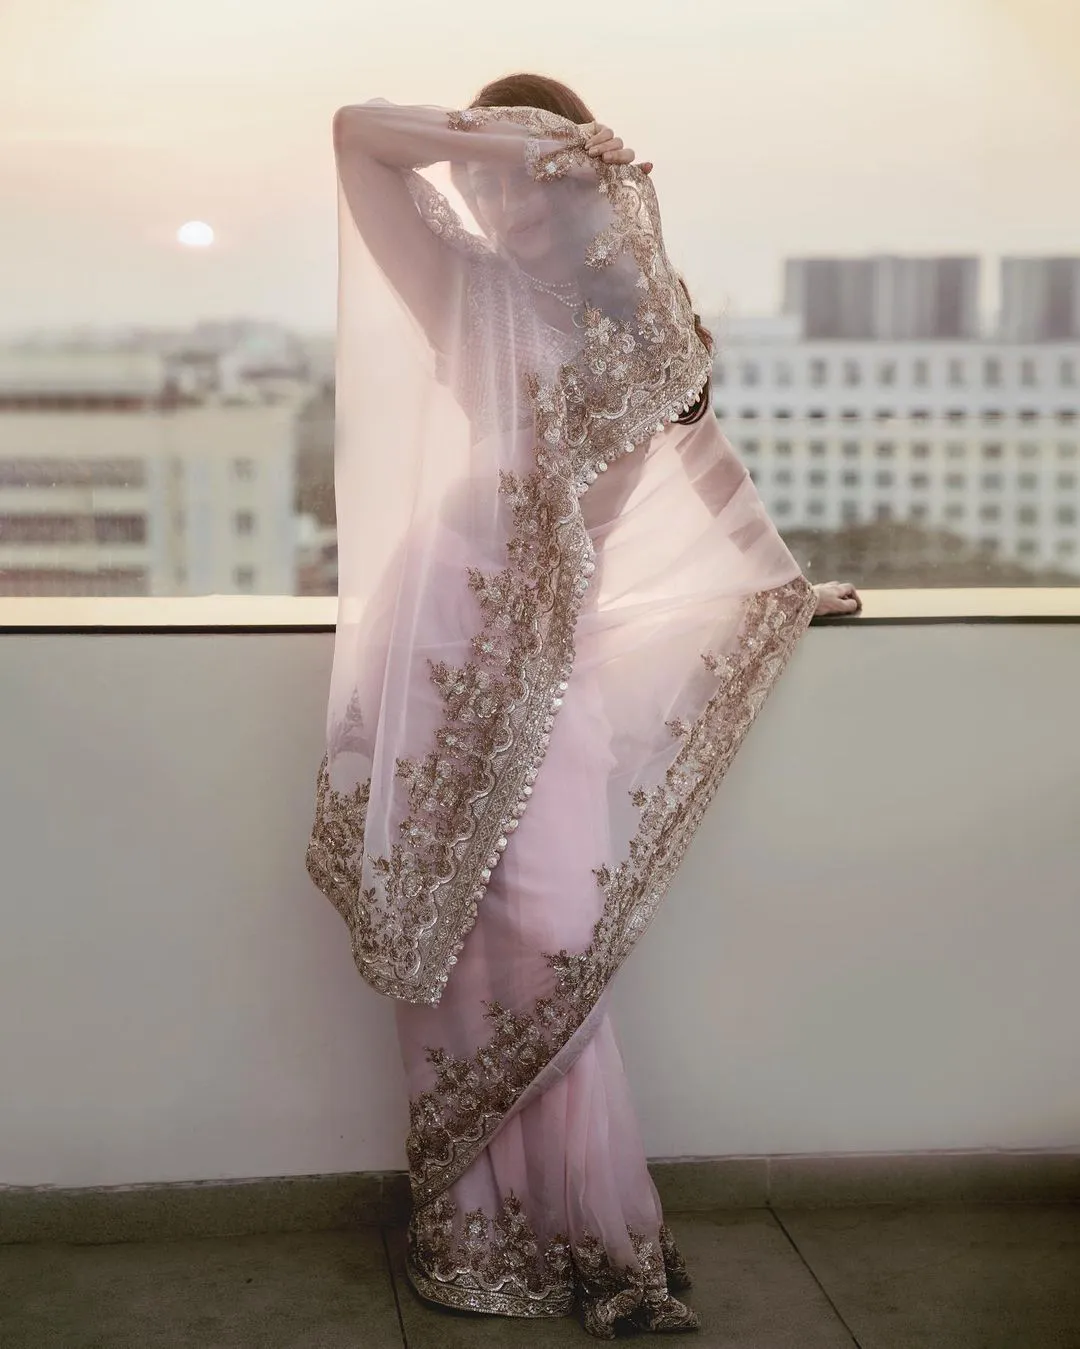 Sobhita Dhulipala shines in a light pink color saree 